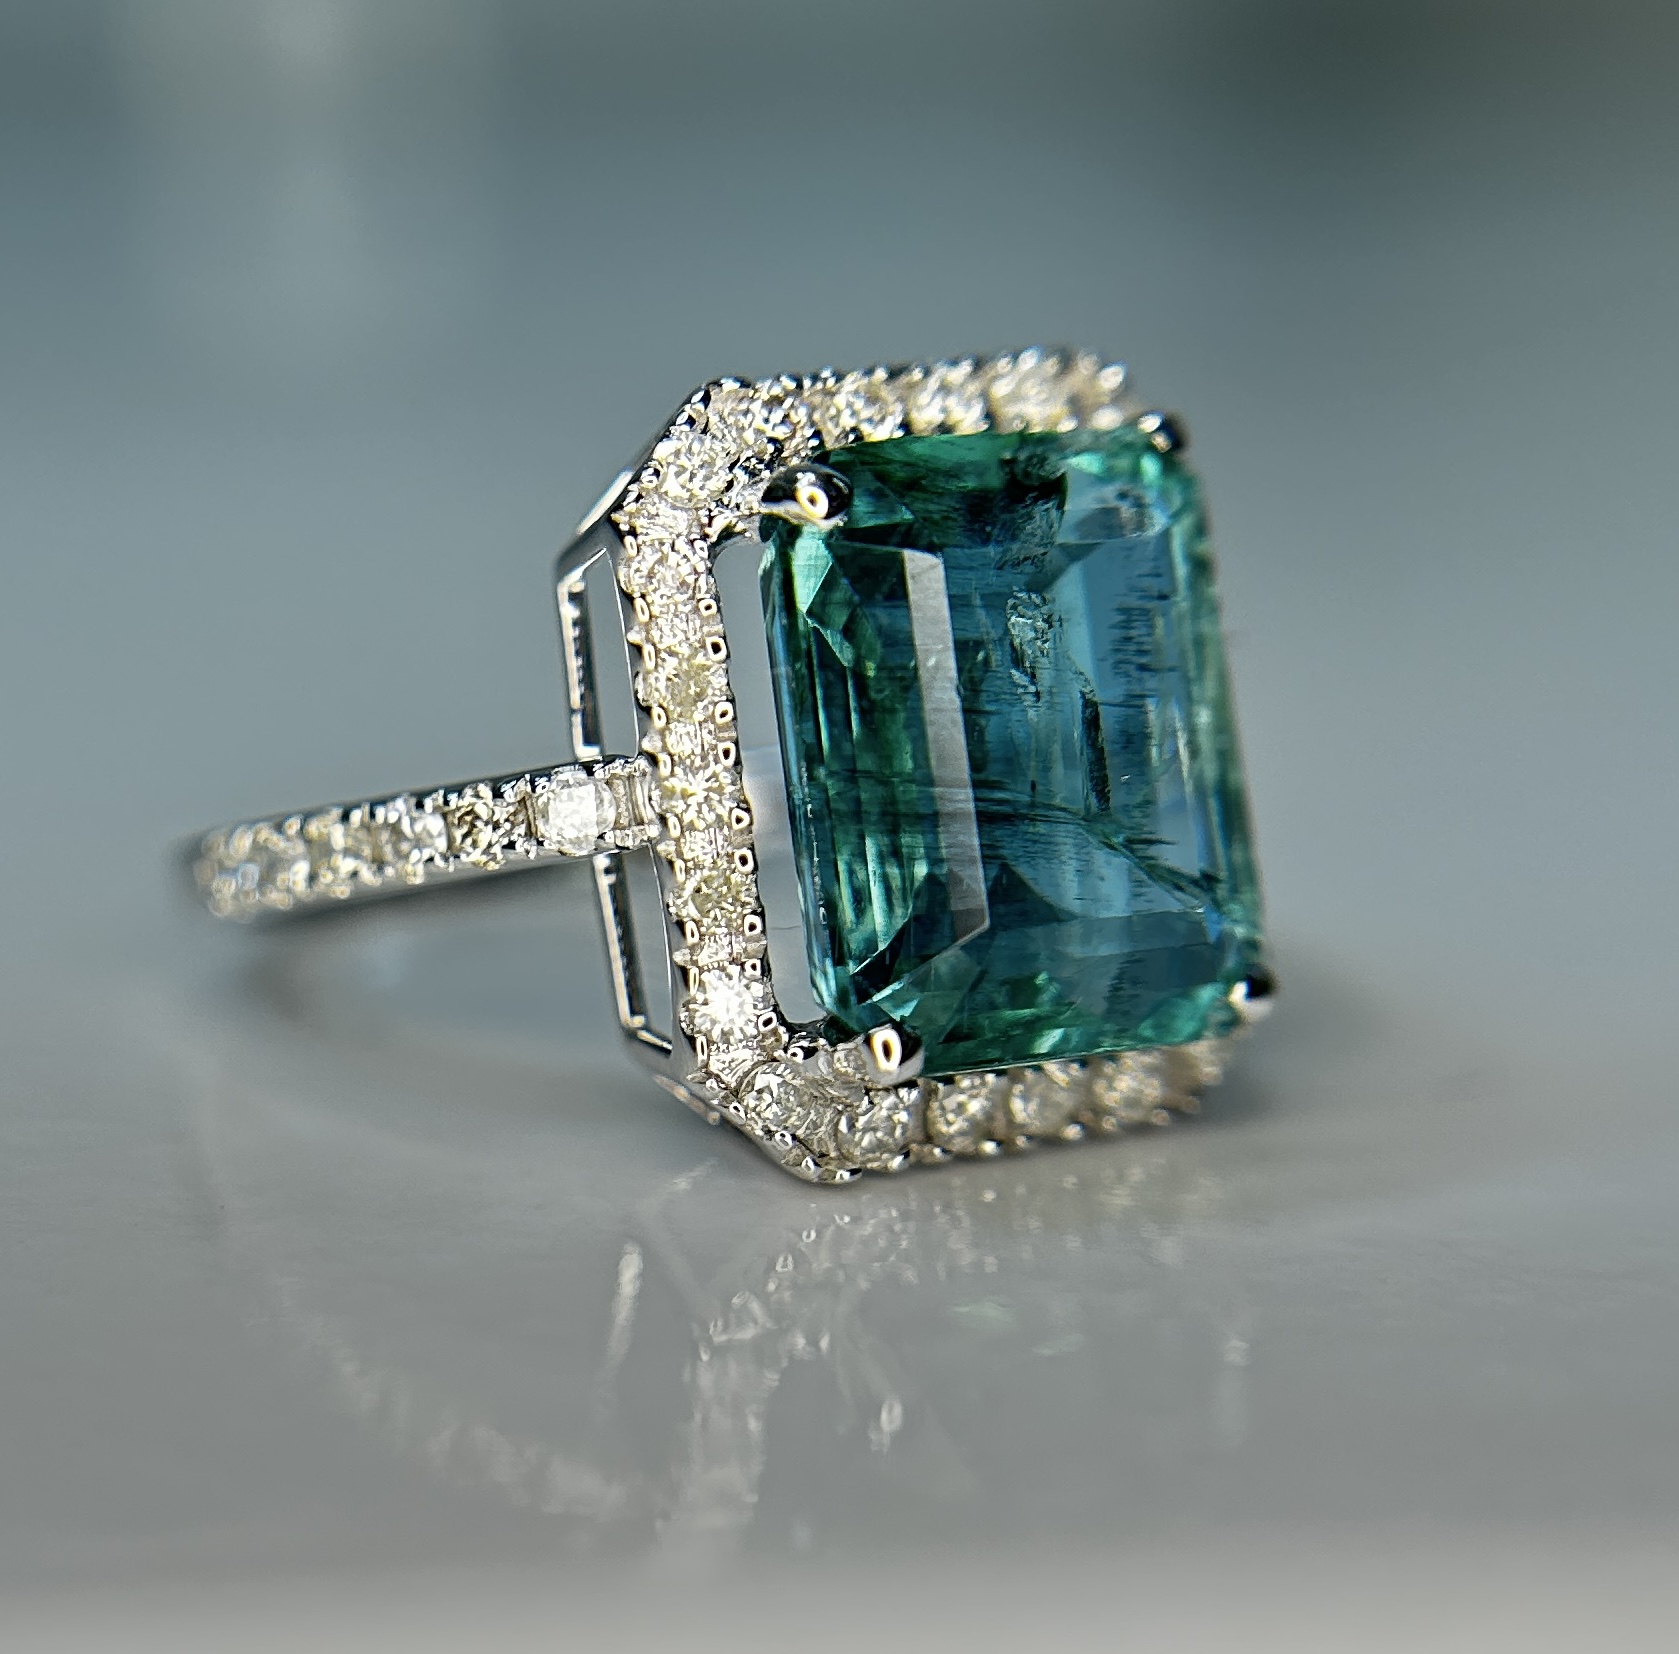 Beautiful Natural Emerald 4.27 CT With Natural Diamonds & 18kGold - Image 7 of 11